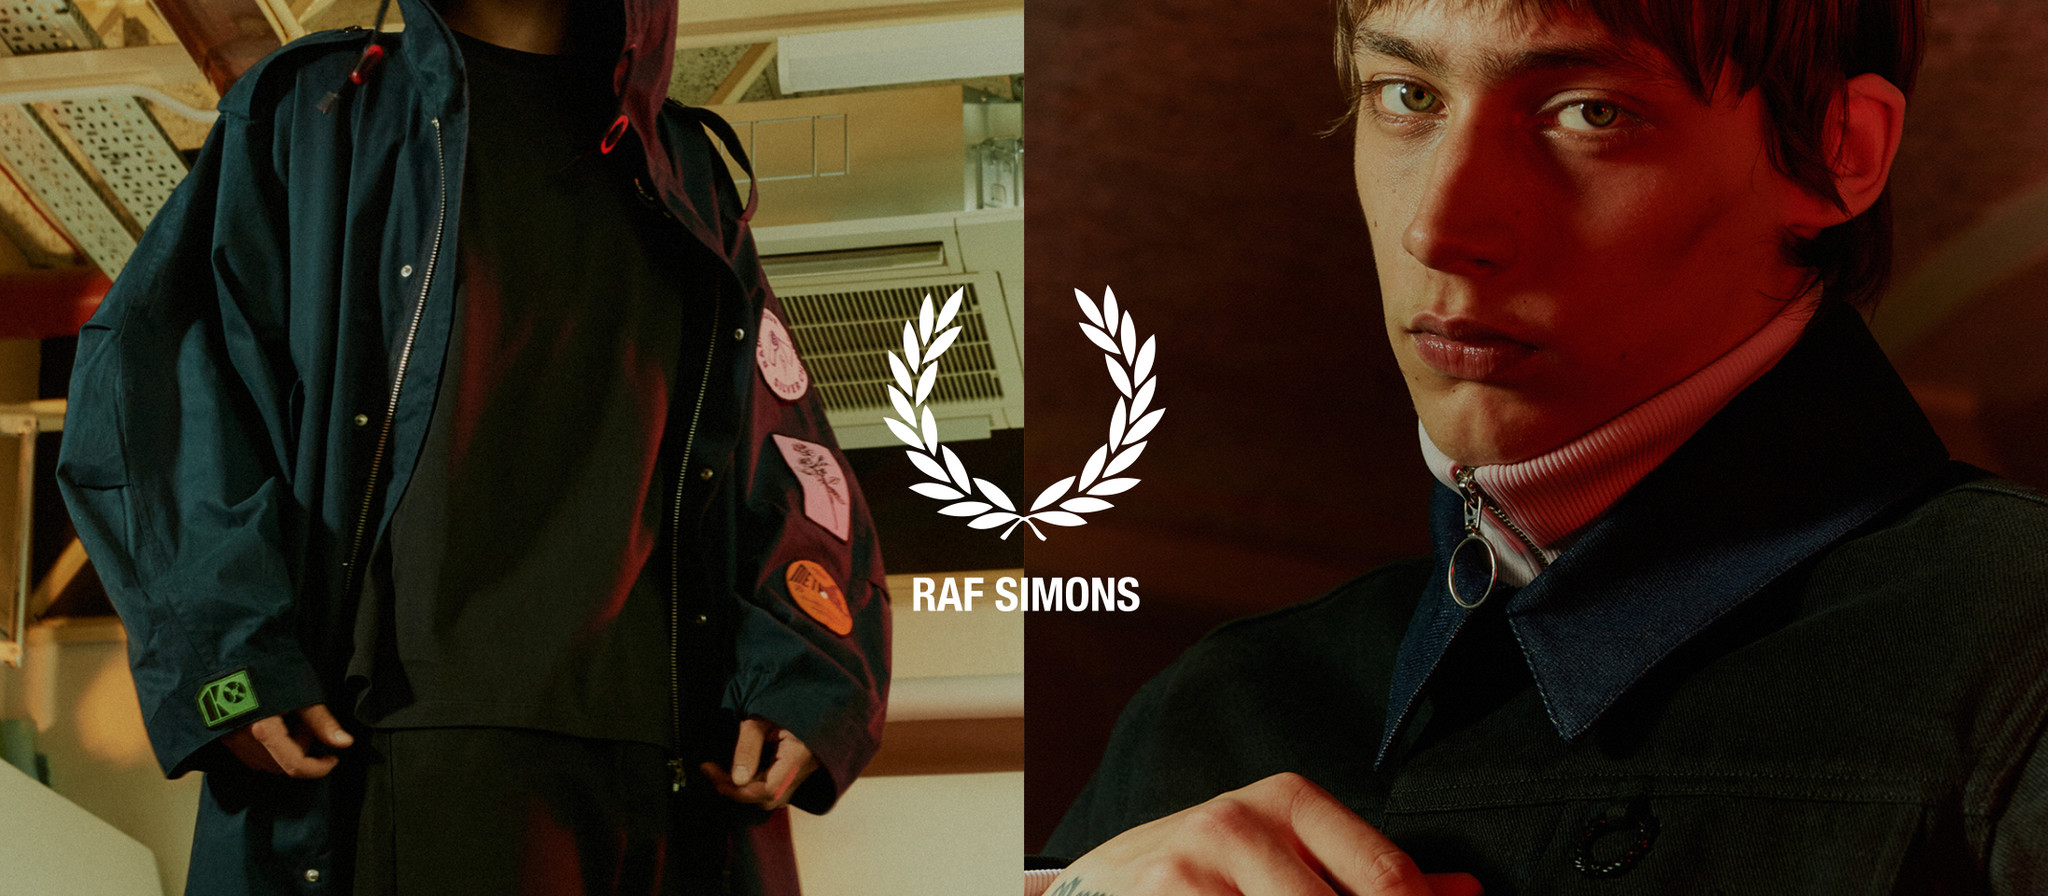 Fred Perry】 Raf Simonsとコラボレーションした新作が登場！｜ヒット 